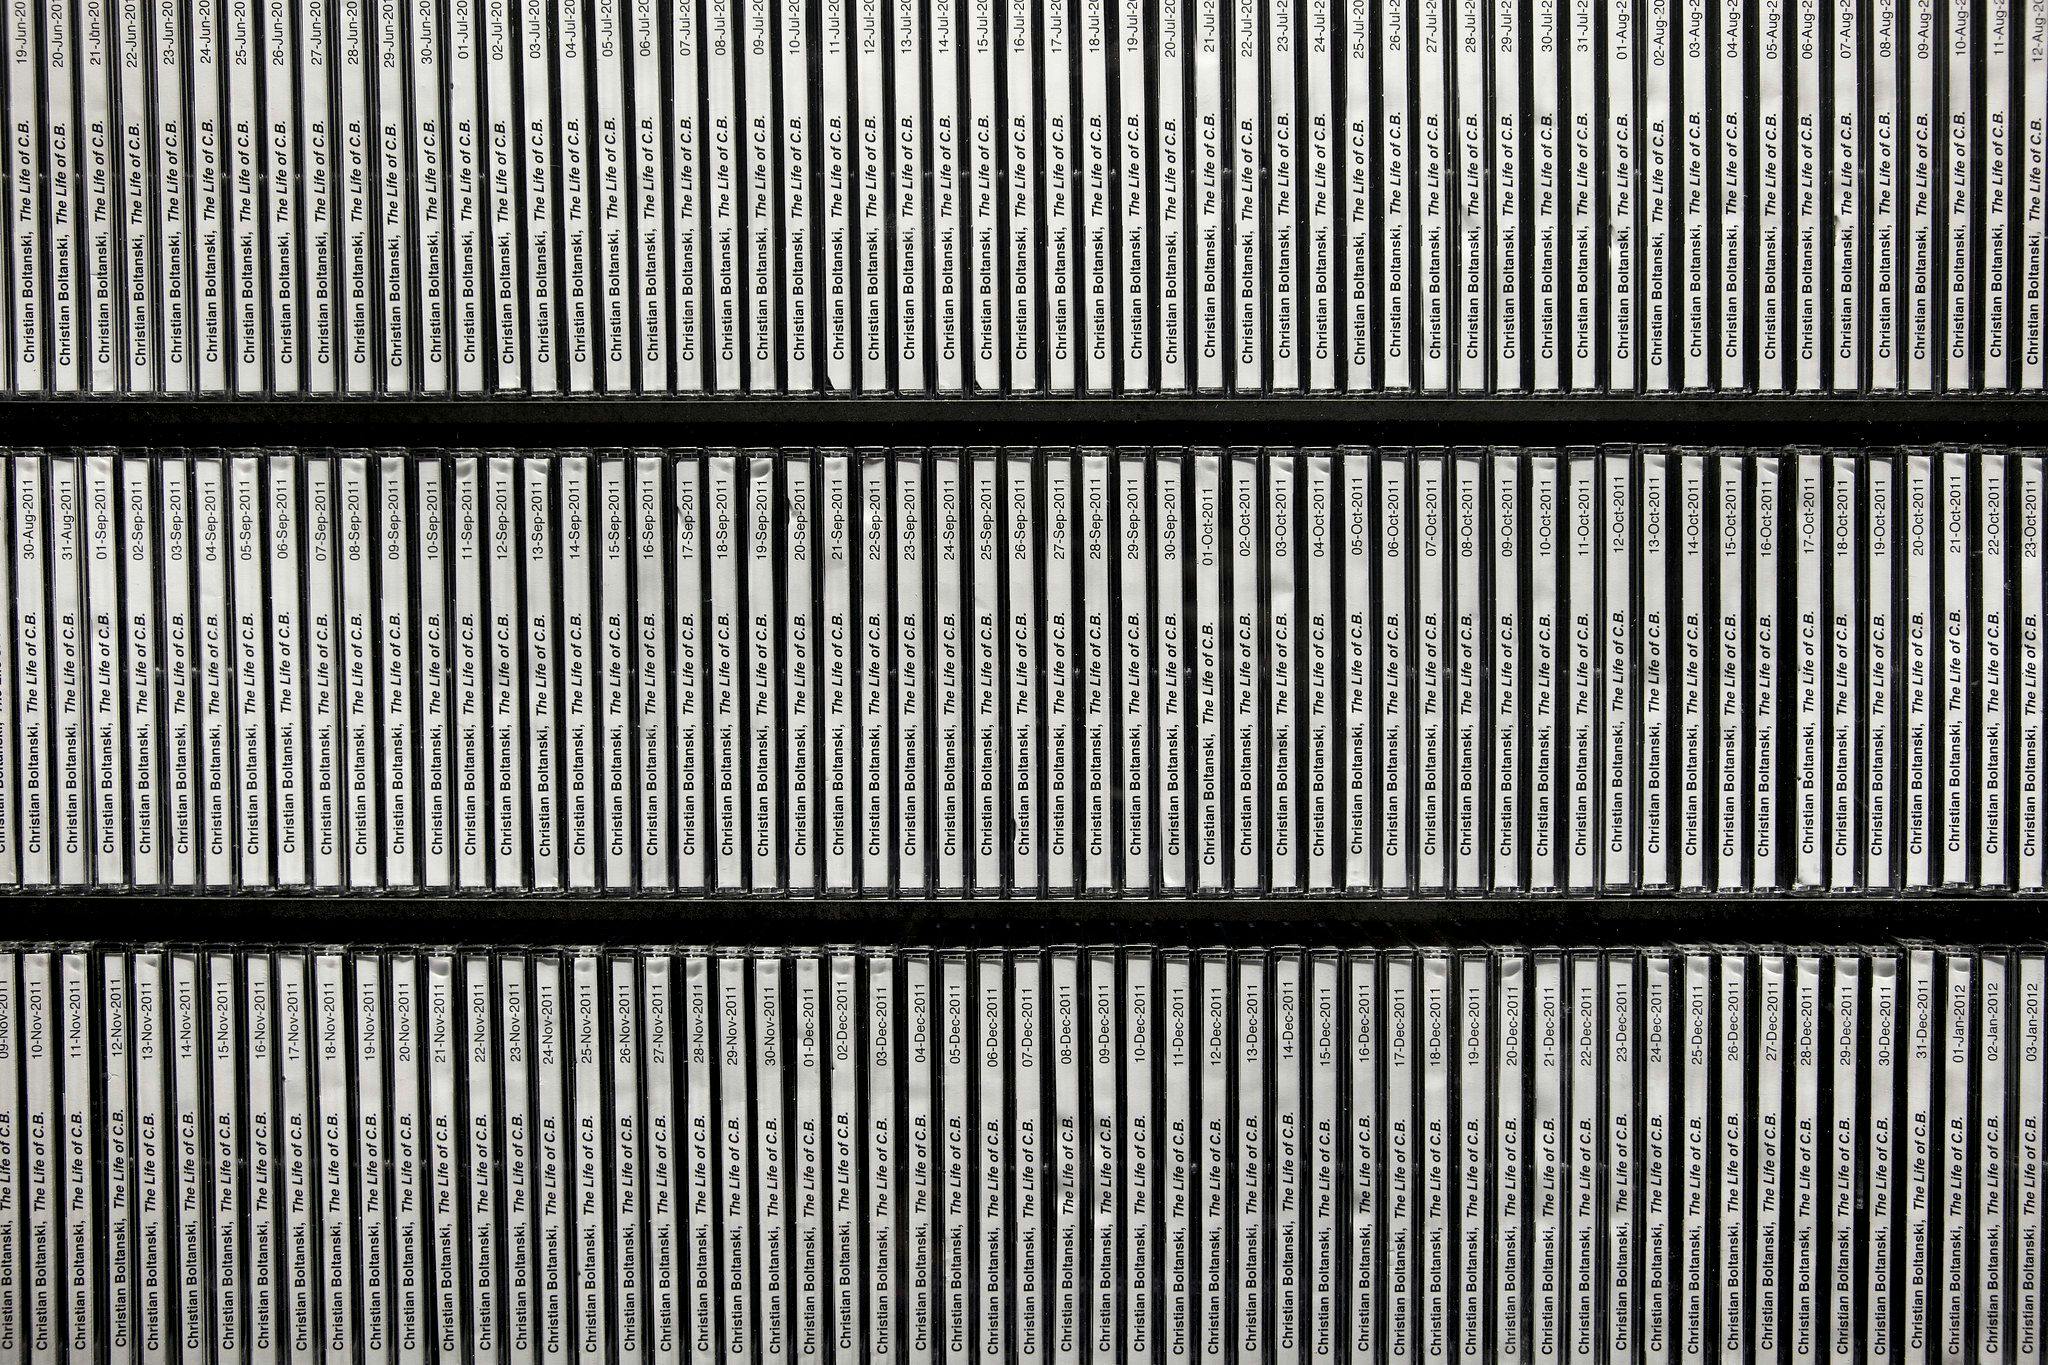 Rows of CD case spines